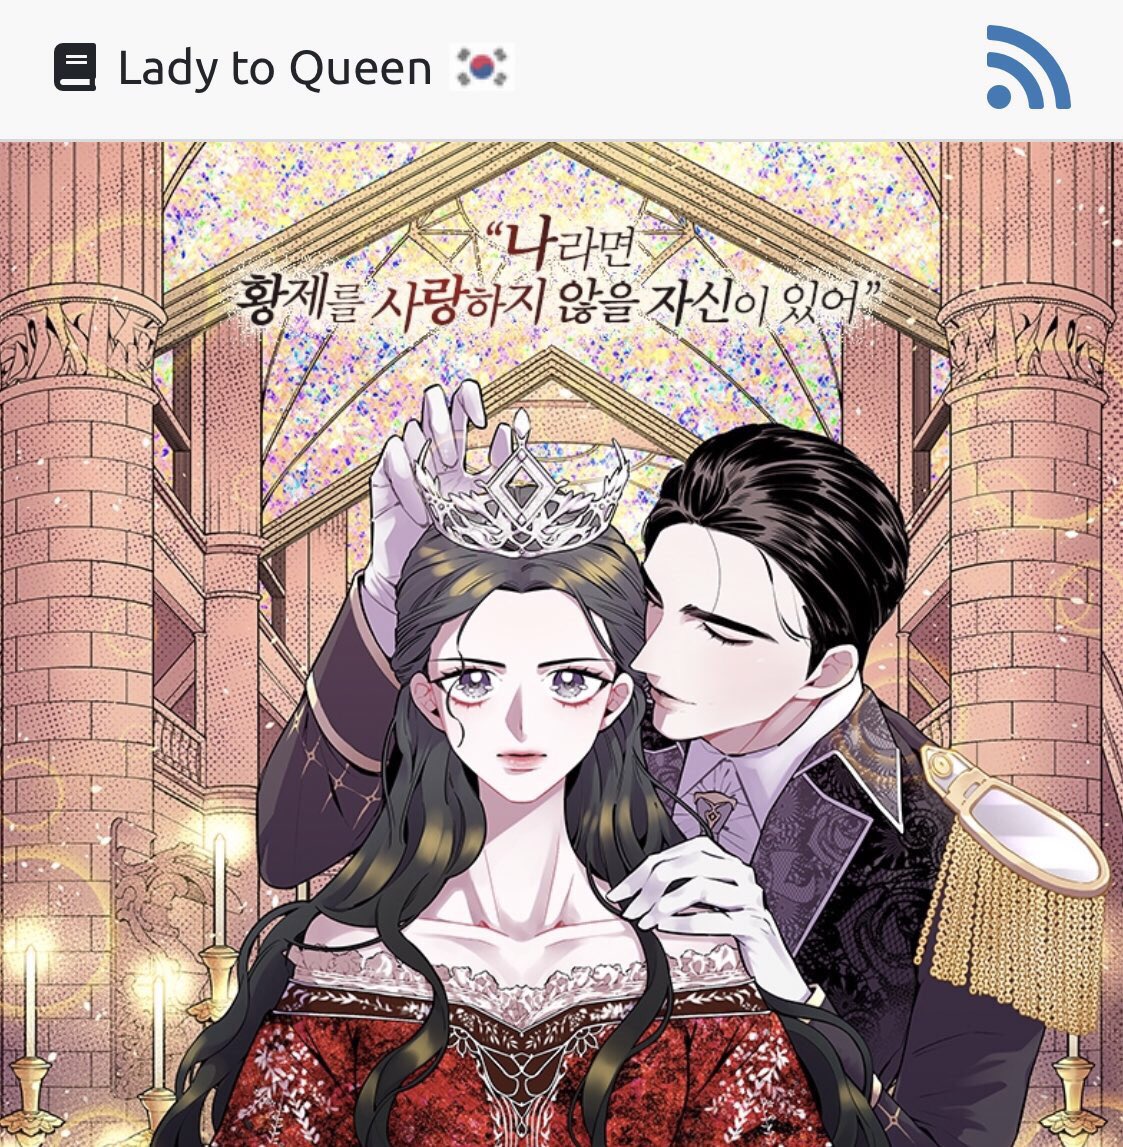 Her kindhearted sister, a queen, couldn’t play the game and was executed along with the entire family by her unfaithful husband and his paramour. after she woke up finding herself back in time. She volunteered to get married to the king instead and she would take her revenge